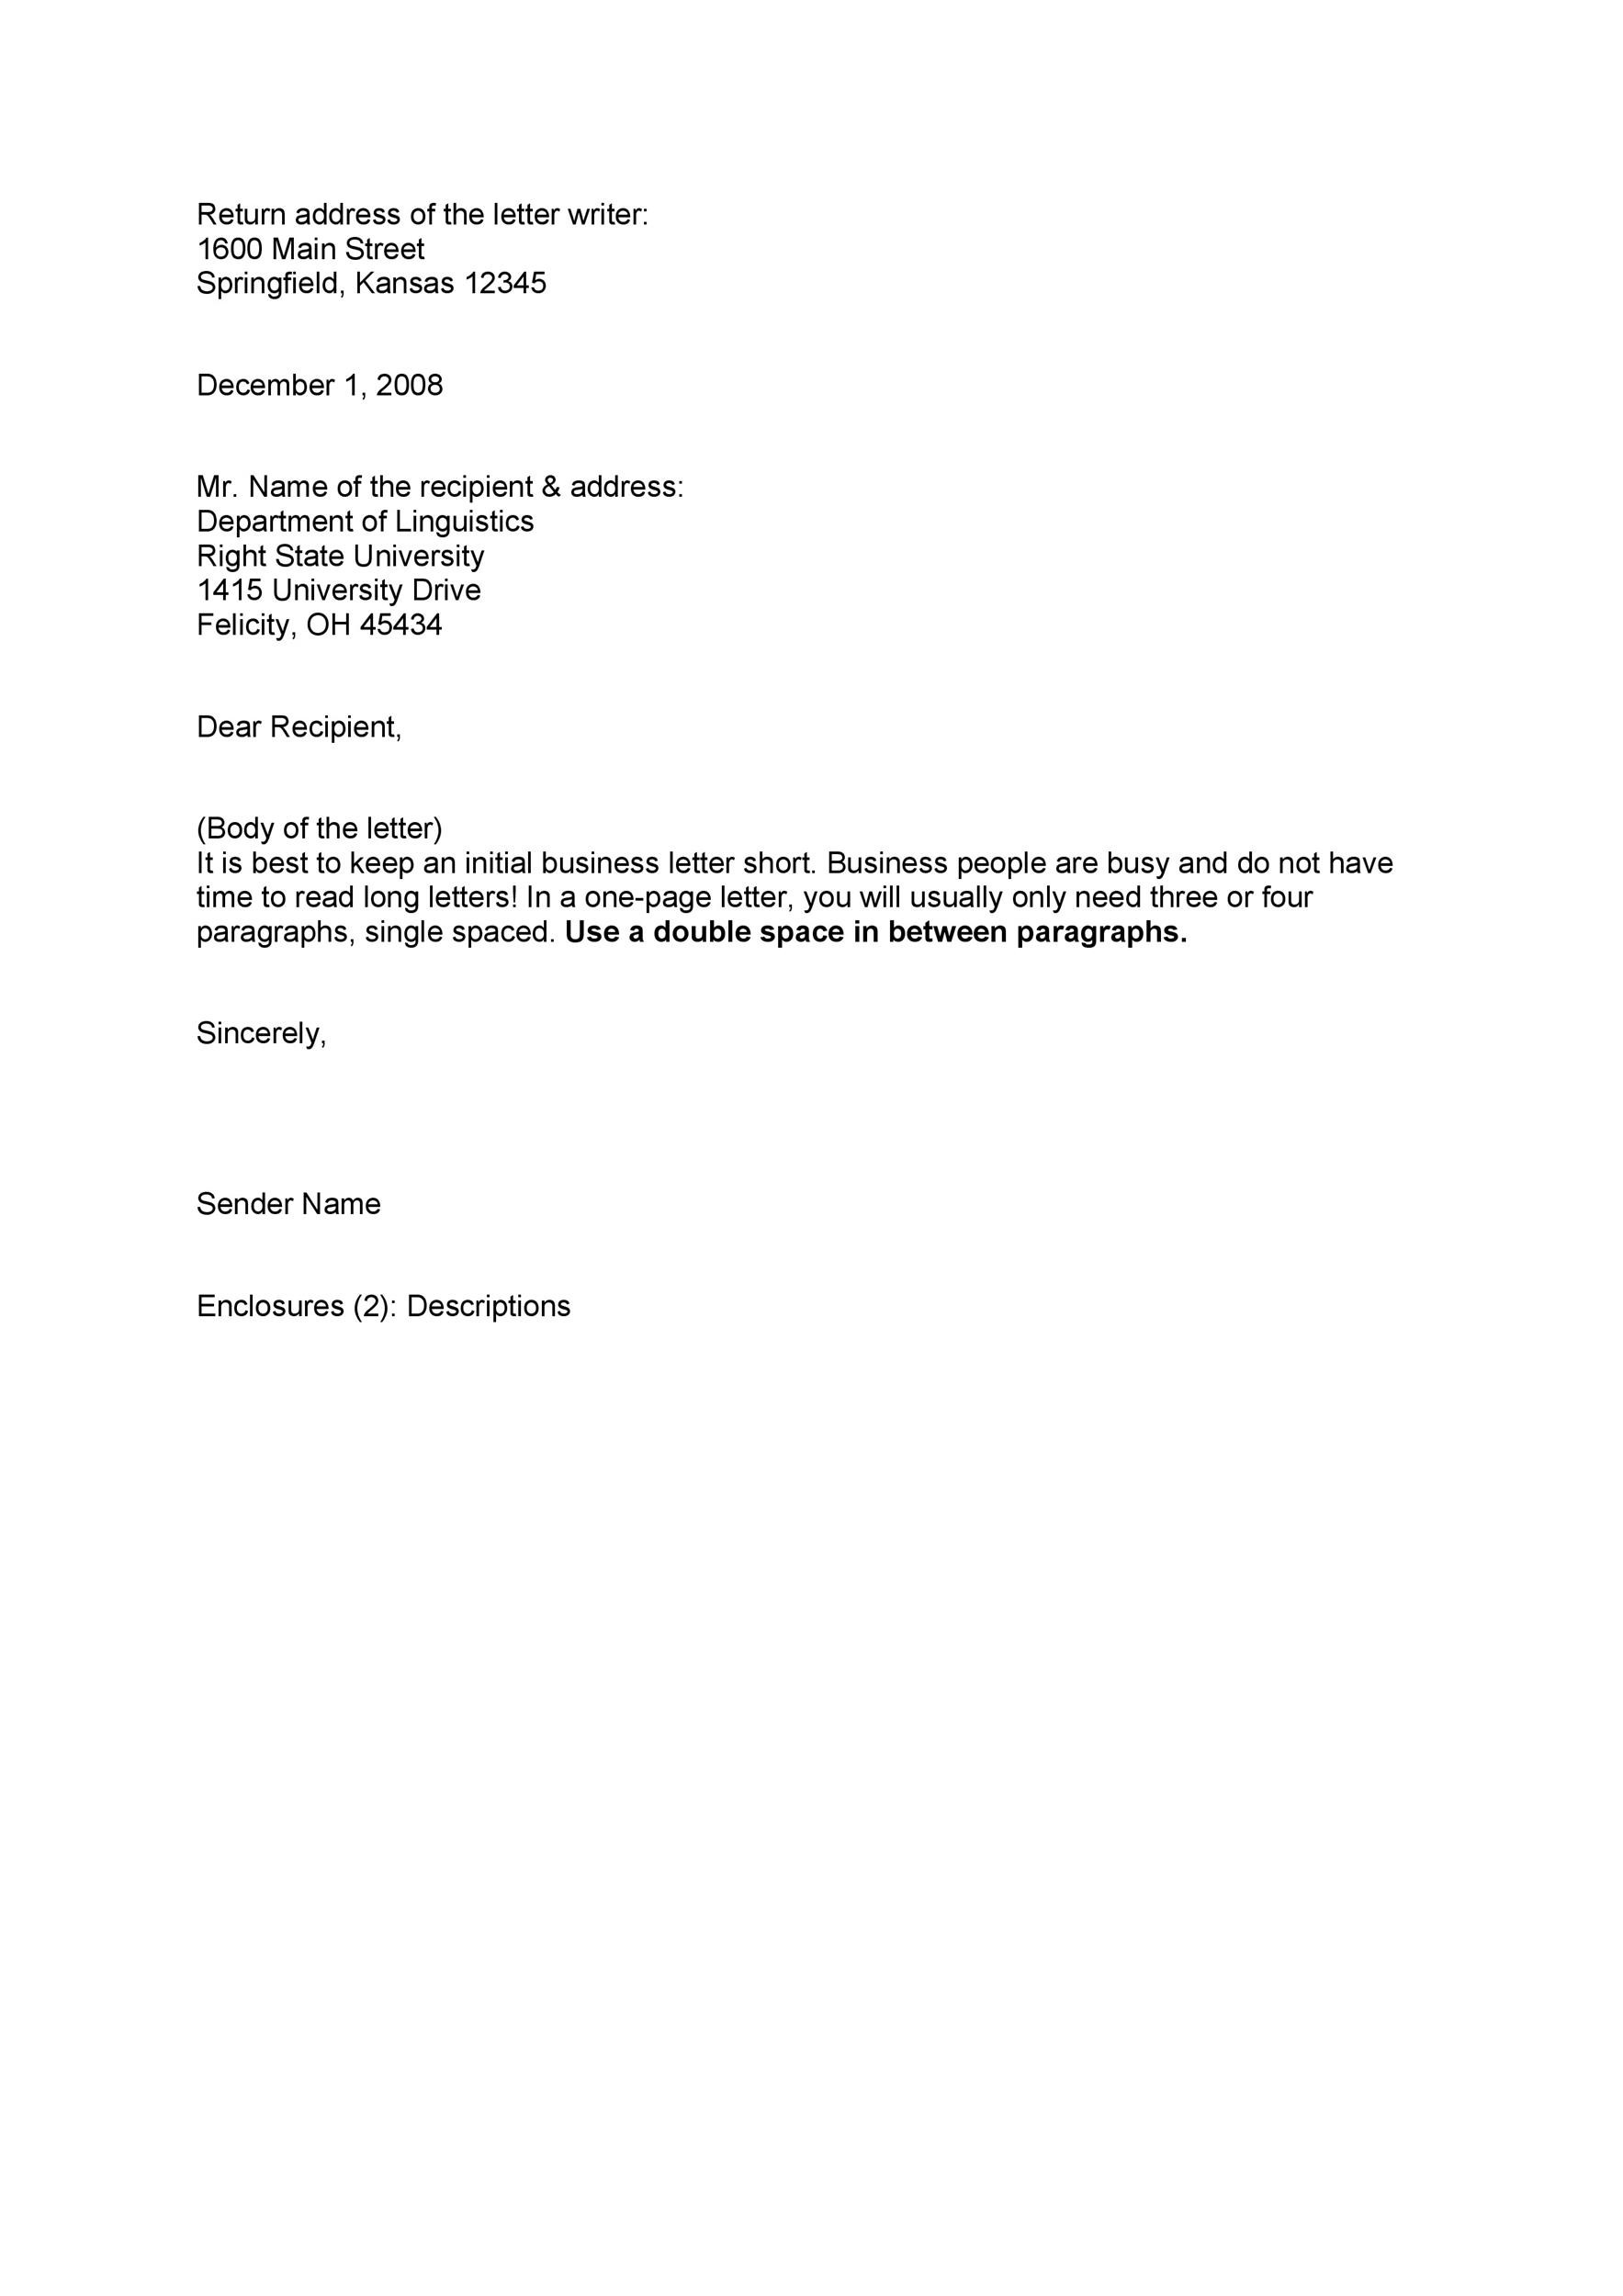 Personal Business Letter Examples from templatelab.com